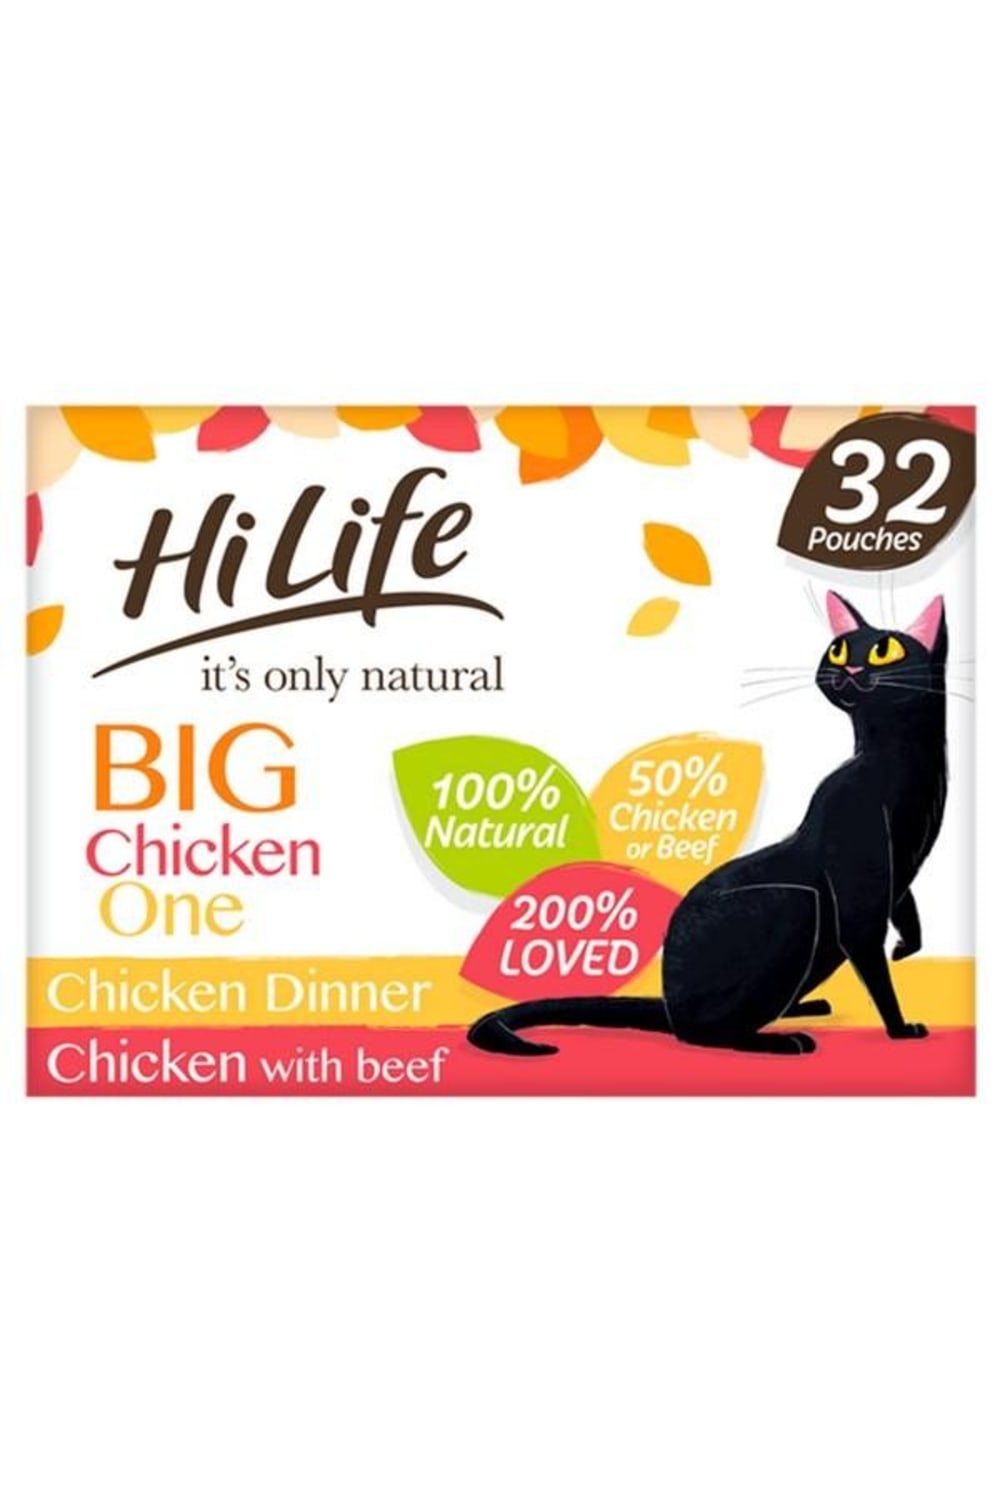 HiLife Its Only Natural Big Chicken One Cat Food In Jelly (32 x 0.15lbs Pouches) (May Vary) (One Size)